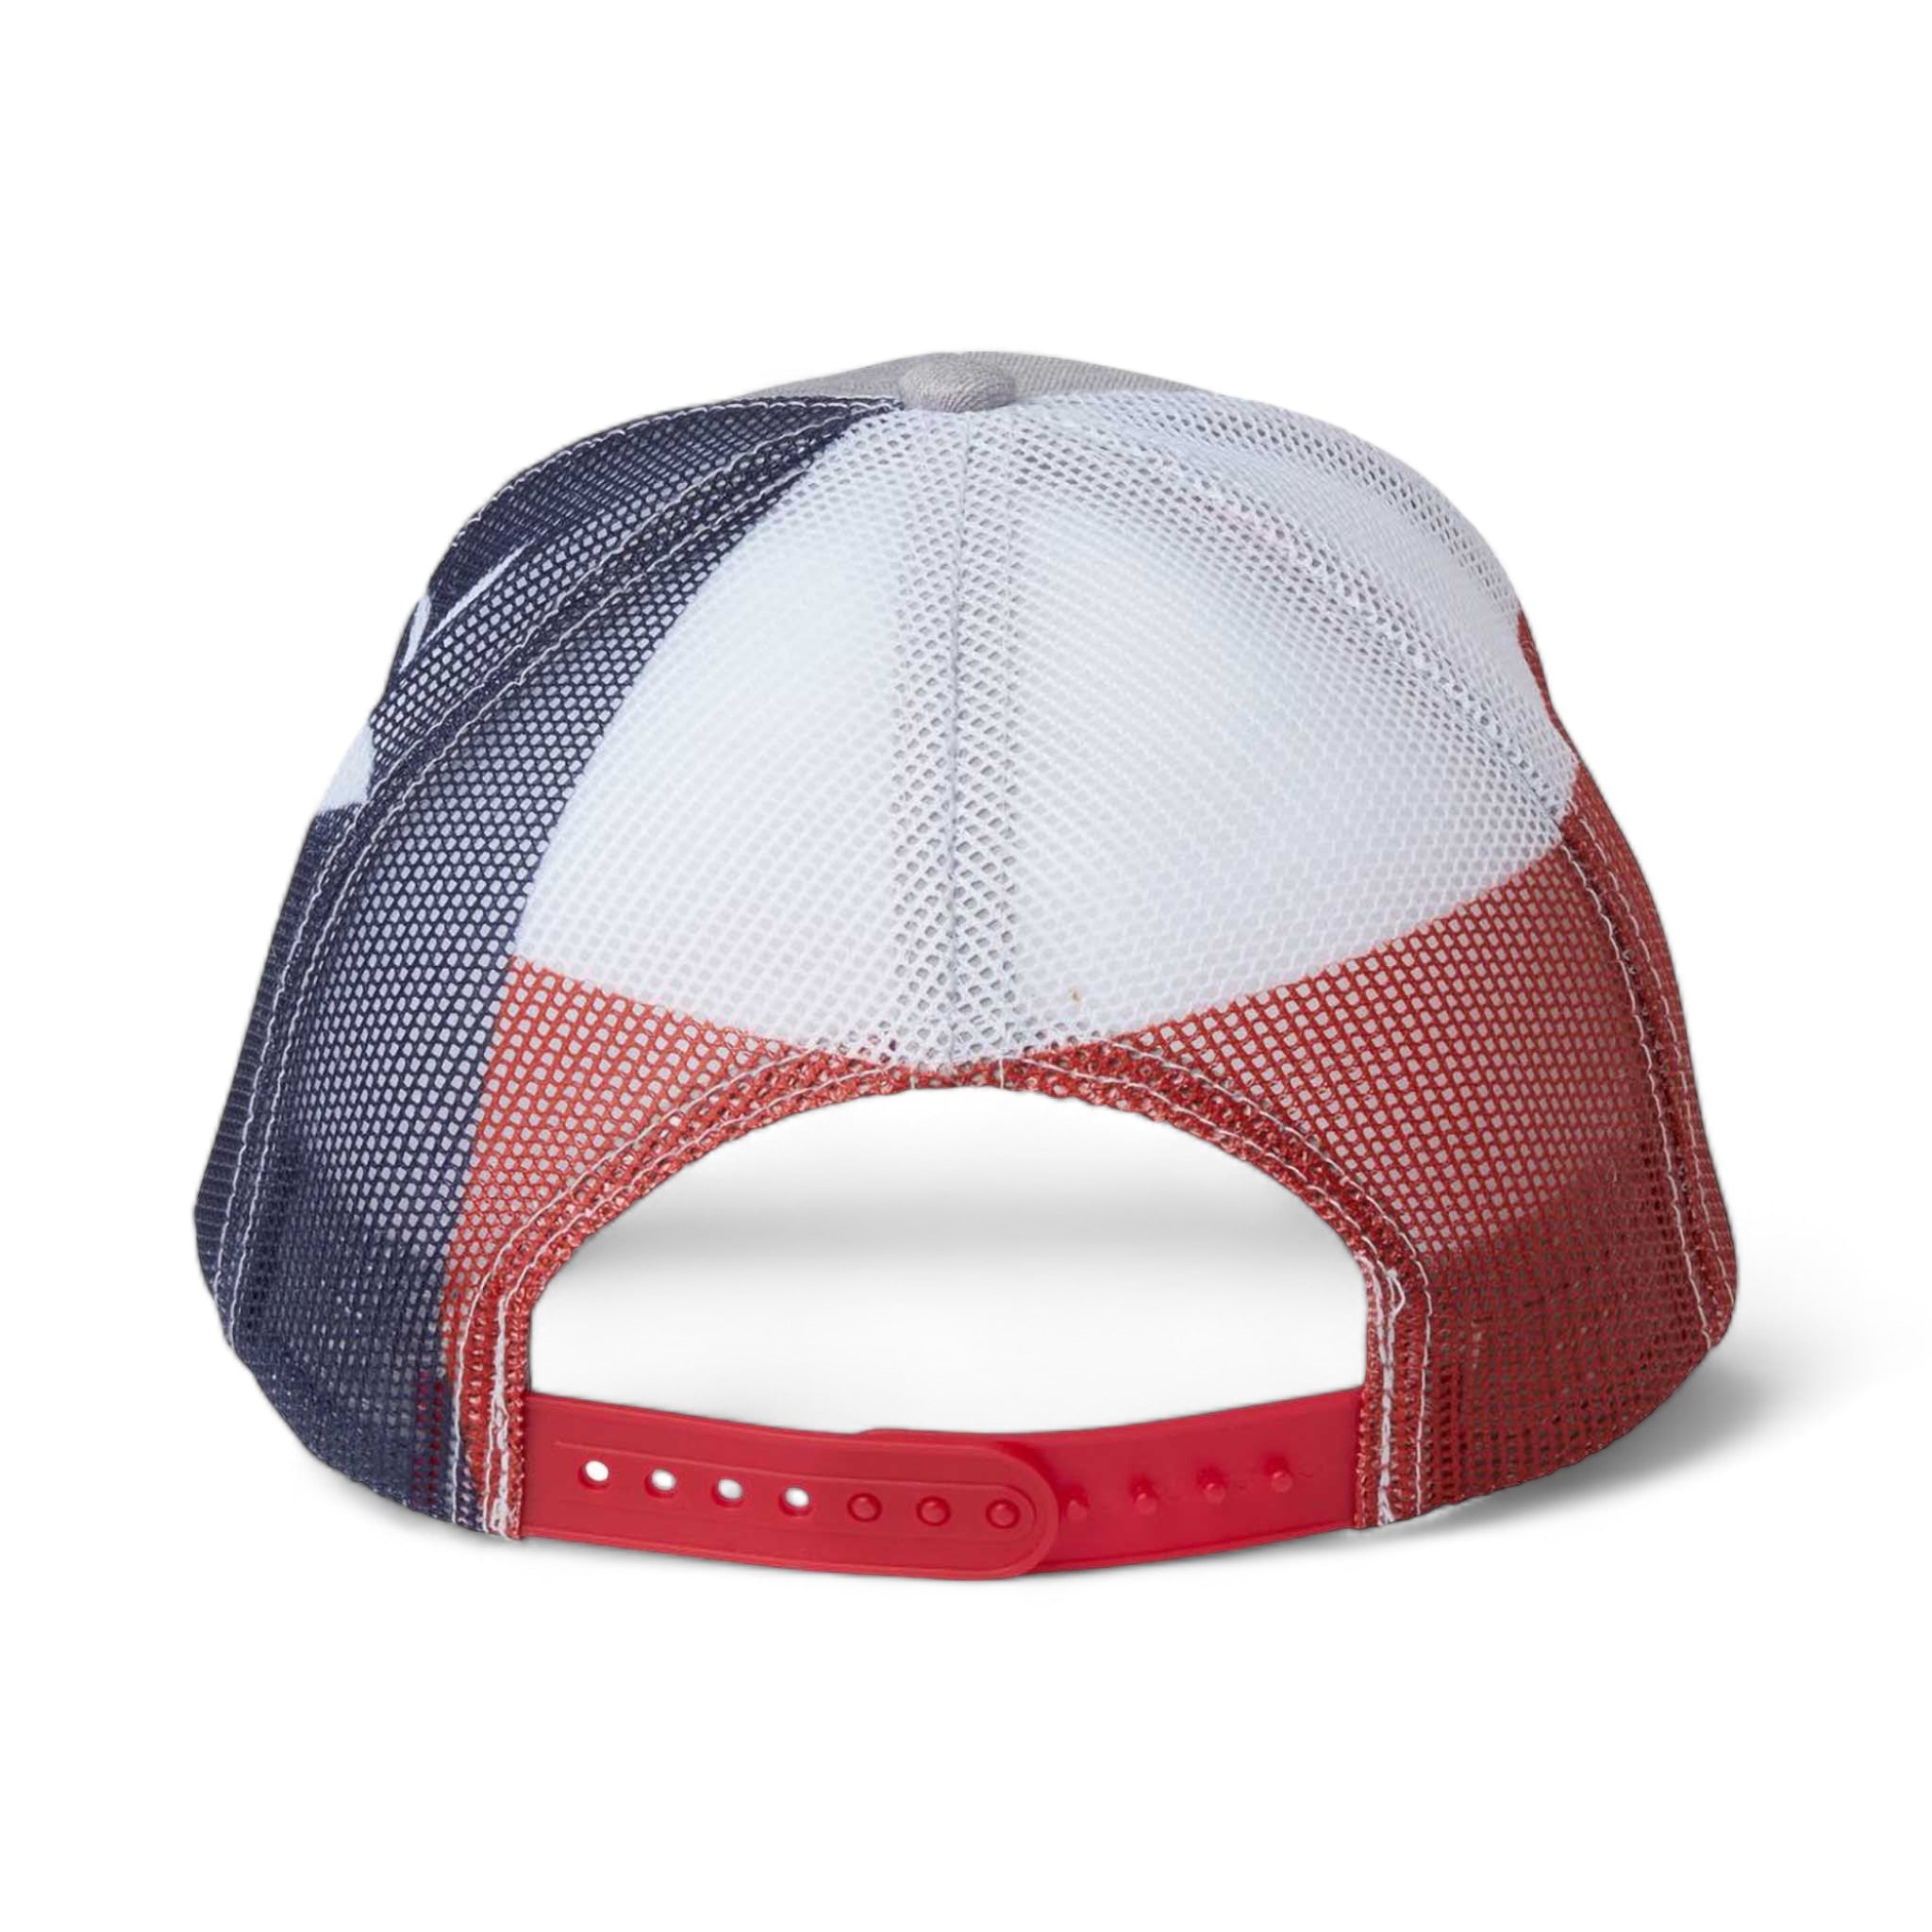 Back view of Kati S700M custom hat in heather and texas flag